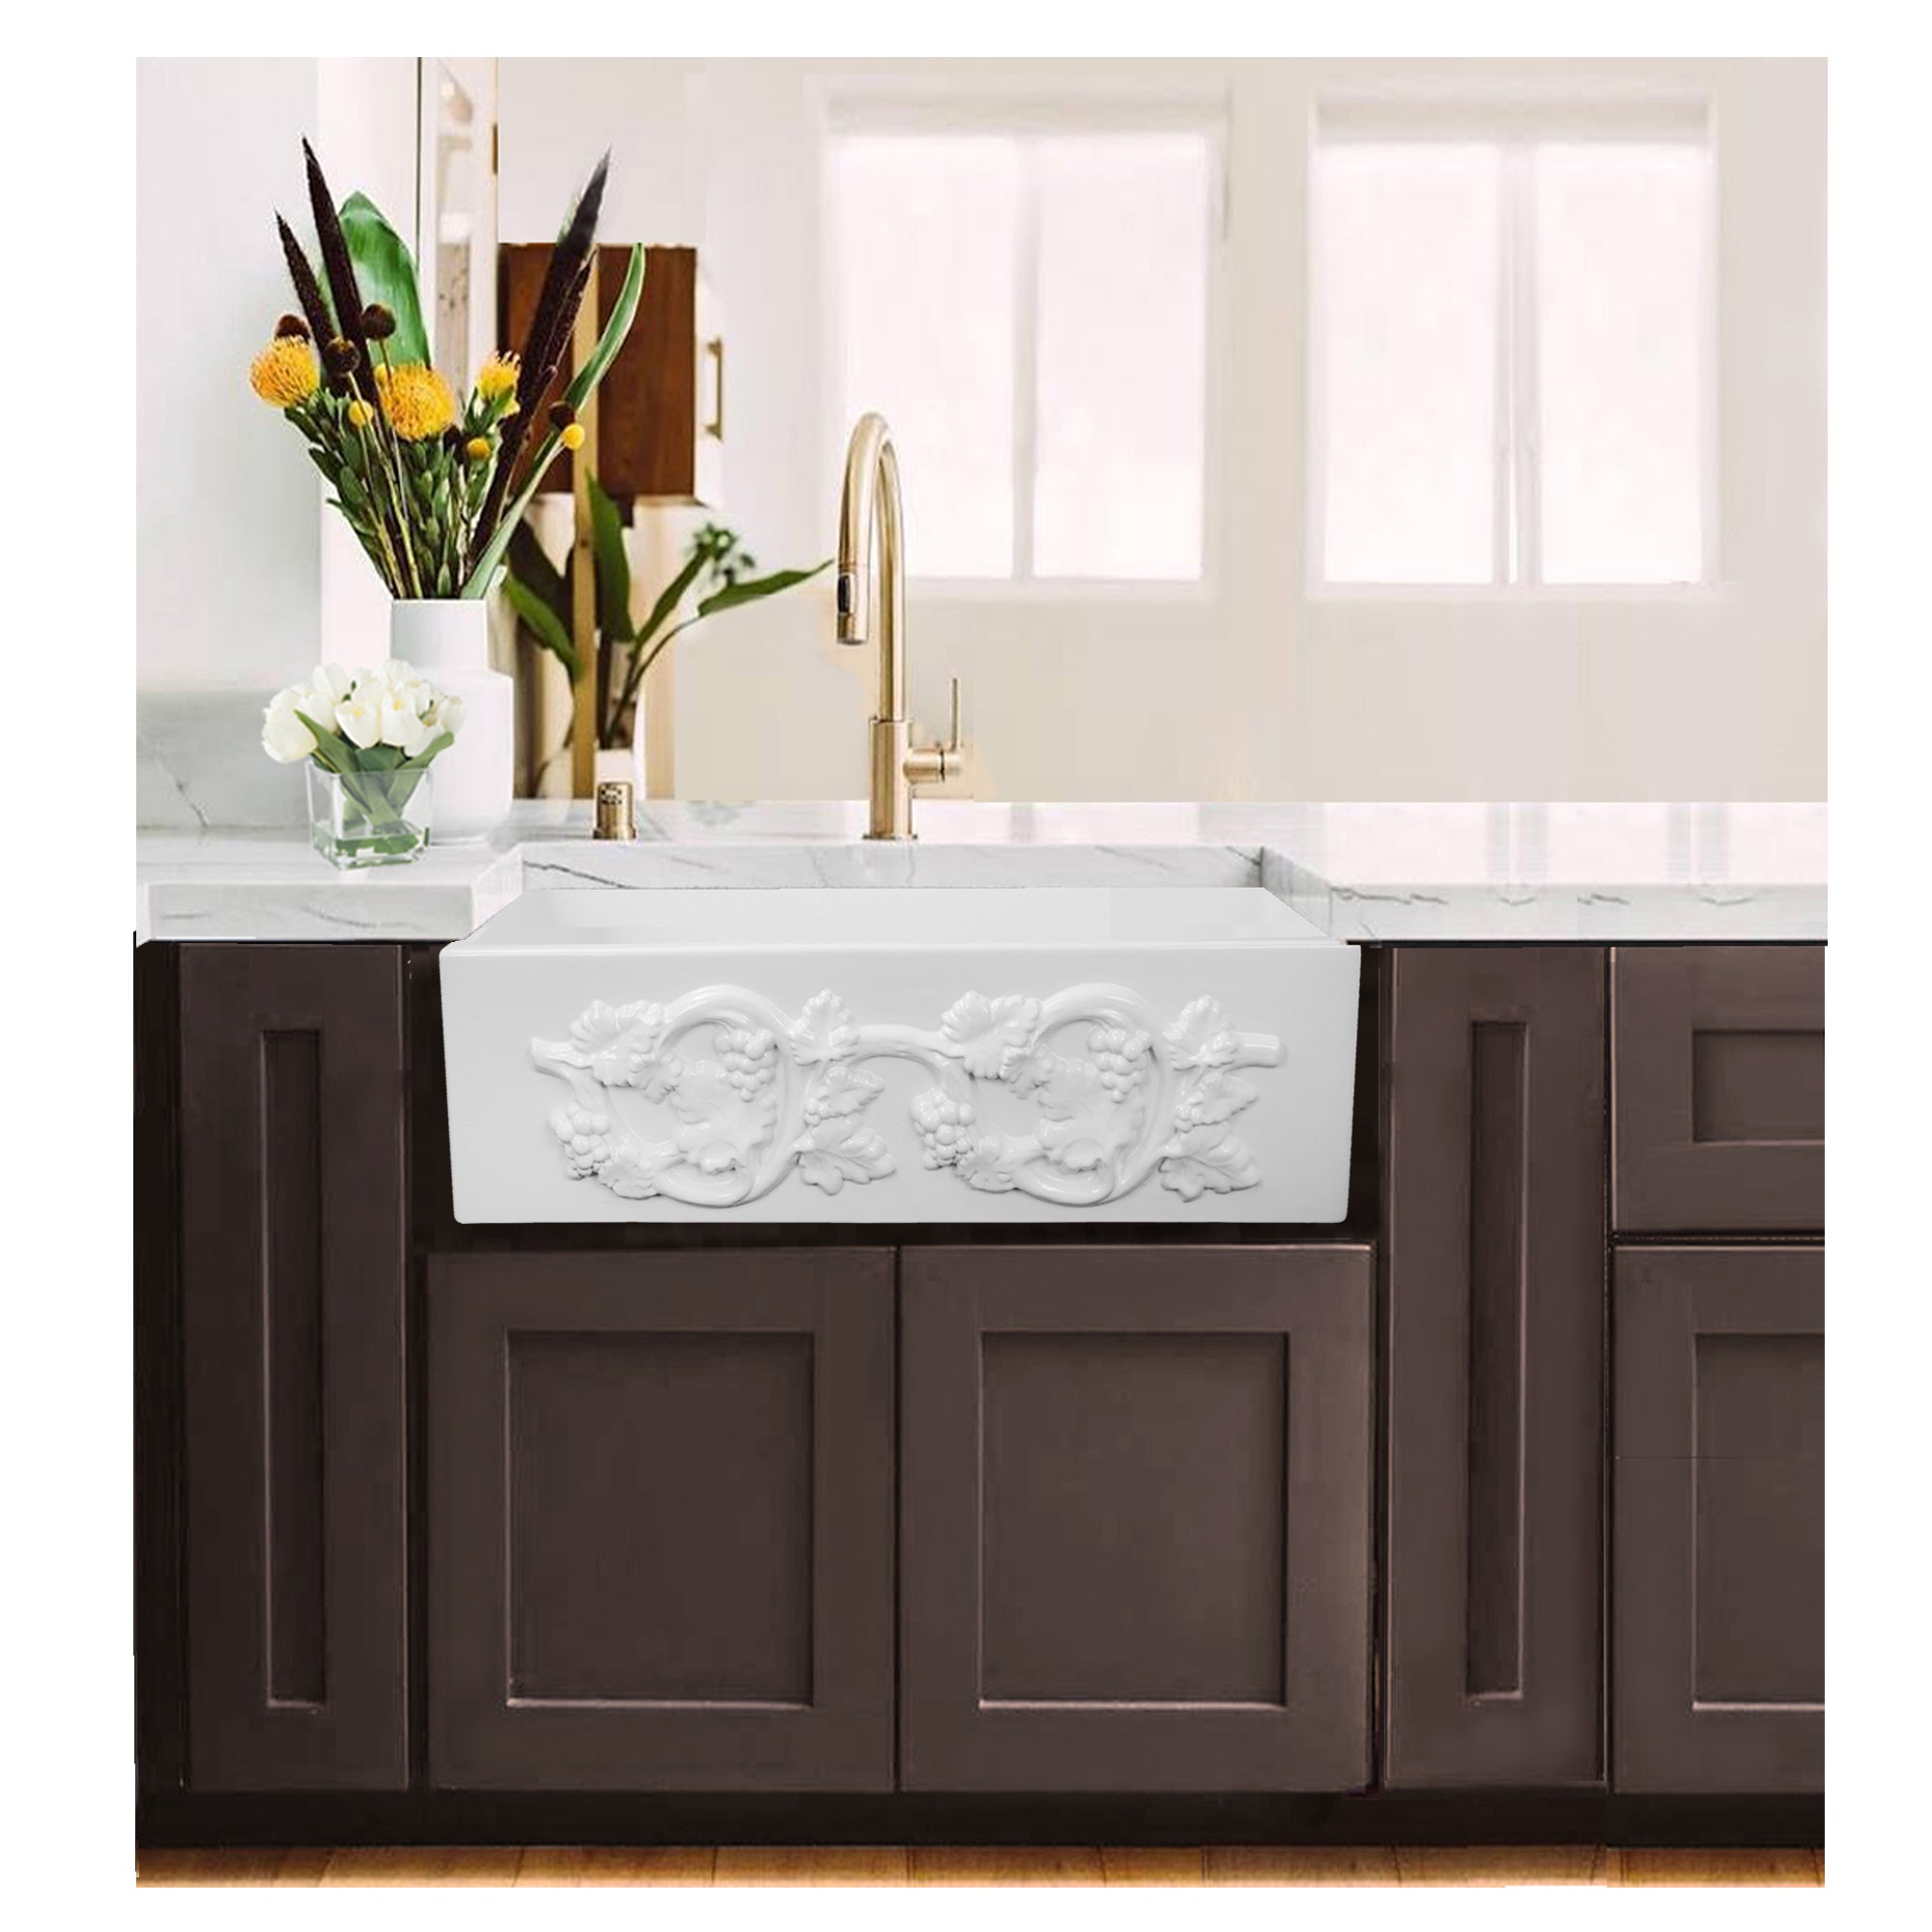 Nantucket Sinks 30" Farmhouse Fireclay Sink with Grapes Apron